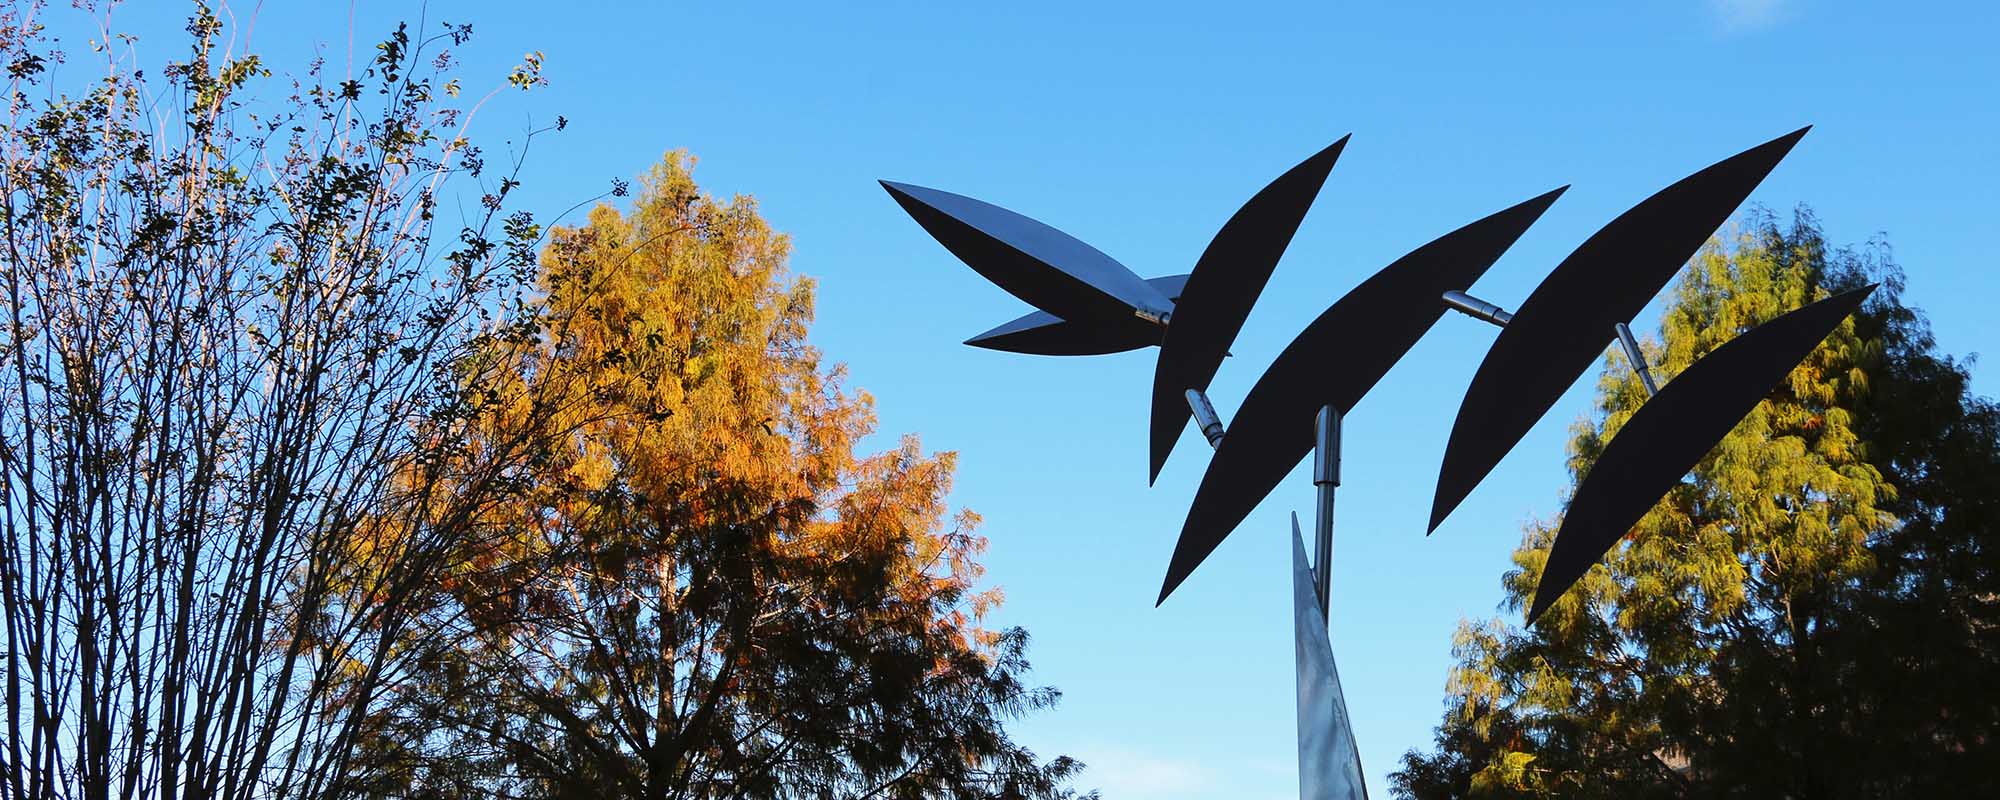 A metallic sculpture with leaf-like parts in the foreground and trees with red and green leaves in the background